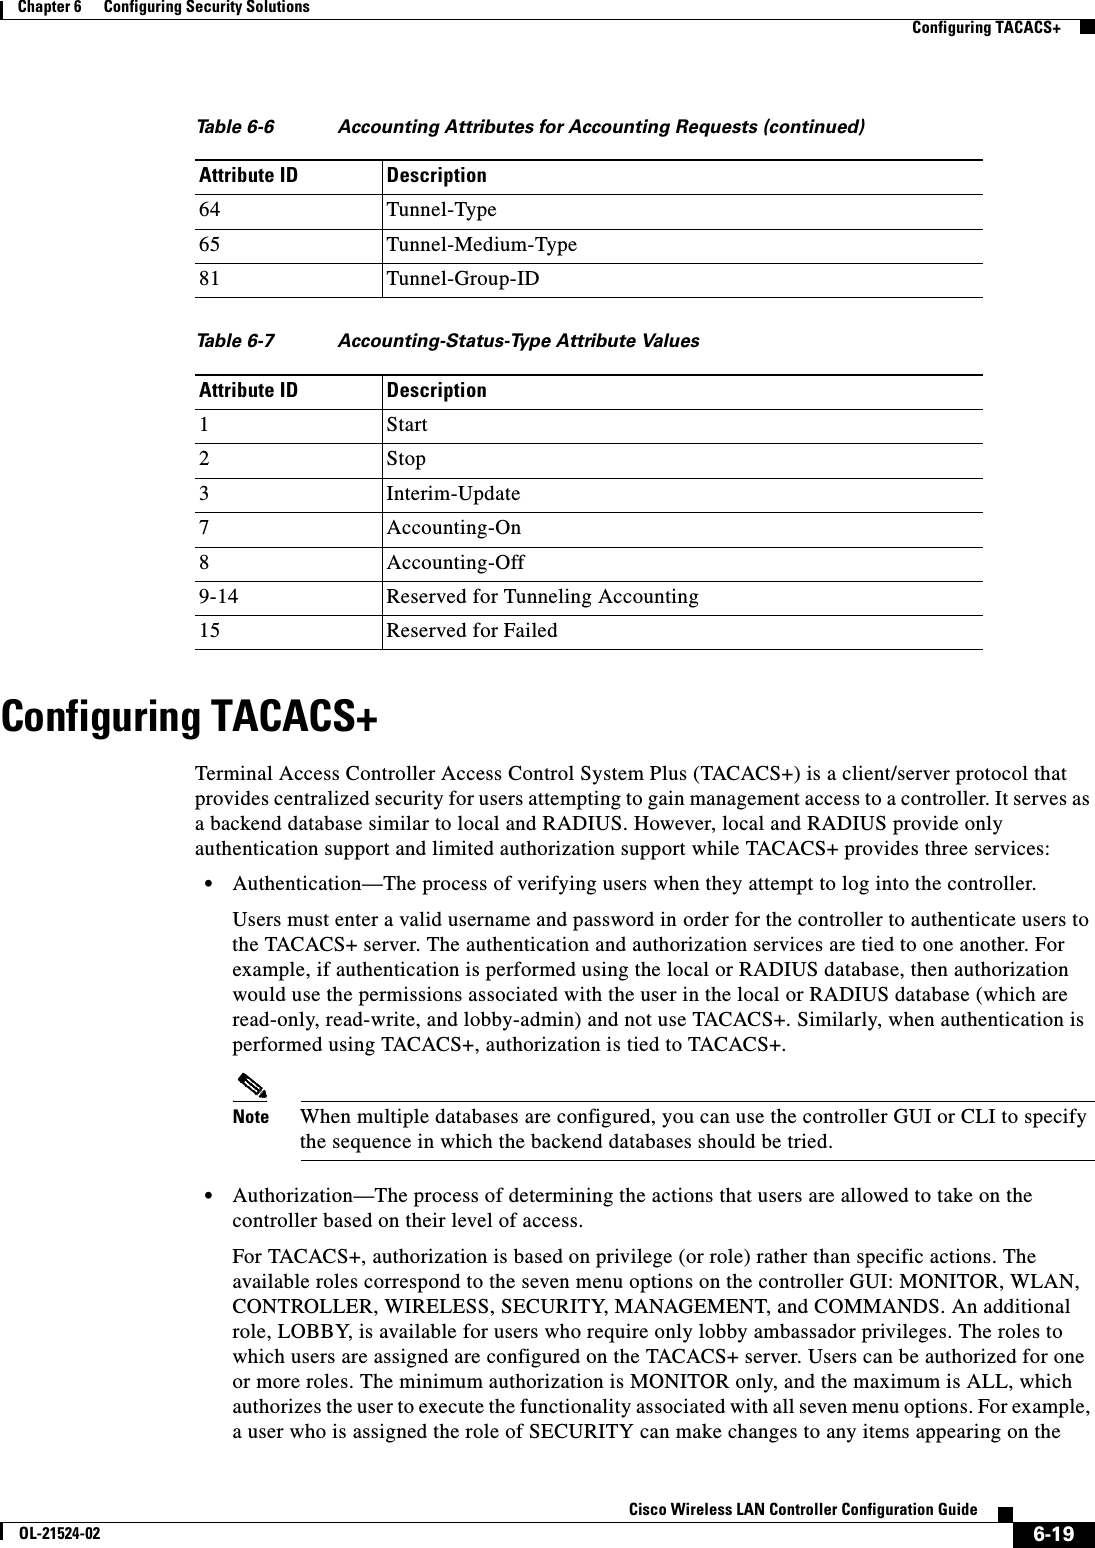  6-19Cisco Wireless LAN Controller Configuration GuideOL-21524-02Chapter 6      Configuring Security Solutions  Configuring TACACS+Configuring TACACS+Terminal Access Controller Access Control System Plus (TACACS+) is a client/server protocol that provides centralized security for users attempting to gain management access to a controller. It serves as a backend database similar to local and RADIUS. However, local and RADIUS provide only authentication support and limited authorization support while TACACS+ provides three services:  • Authentication—The process of verifying users when they attempt to log into the controller.Users must enter a valid username and password in order for the controller to authenticate users to the TACACS+ server. The authentication and authorization services are tied to one another. For example, if authentication is performed using the local or RADIUS database, then authorization would use the permissions associated with the user in the local or RADIUS database (which are read-only, read-write, and lobby-admin) and not use TACACS+. Similarly, when authentication is performed using TACACS+, authorization is tied to TACACS+.Note When multiple databases are configured, you can use the controller GUI or CLI to specify the sequence in which the backend databases should be tried.  • Authorization—The process of determining the actions that users are allowed to take on the controller based on their level of access.For TACACS+, authorization is based on privilege (or role) rather than specific actions. The available roles correspond to the seven menu options on the controller GUI: MONITOR, WLAN, CONTROLLER, WIRELESS, SECURITY, MANAGEMENT, and COMMANDS. An additional role, LOBBY, is available for users who require only lobby ambassador privileges. The roles to which users are assigned are configured on the TACACS+ server. Users can be authorized for one or more roles. The minimum authorization is MONITOR only, and the maximum is ALL, which authorizes the user to execute the functionality associated with all seven menu options. For example, a user who is assigned the role of SECURITY can make changes to any items appearing on the 64 Tunnel-Type65 Tunnel-Medium-Type81 Tunnel-Group-IDTa b l e  6-7 Accounting-Status-Type Attribute ValuesAttribute ID Description1Start2Stop3Interim-Update7Accounting-On8Accounting-Off9-14 Reserved for Tunneling Accounting15 Reserved for FailedTable 6-6 Accounting Attributes for Accounting Requests (continued)Attribute ID Description